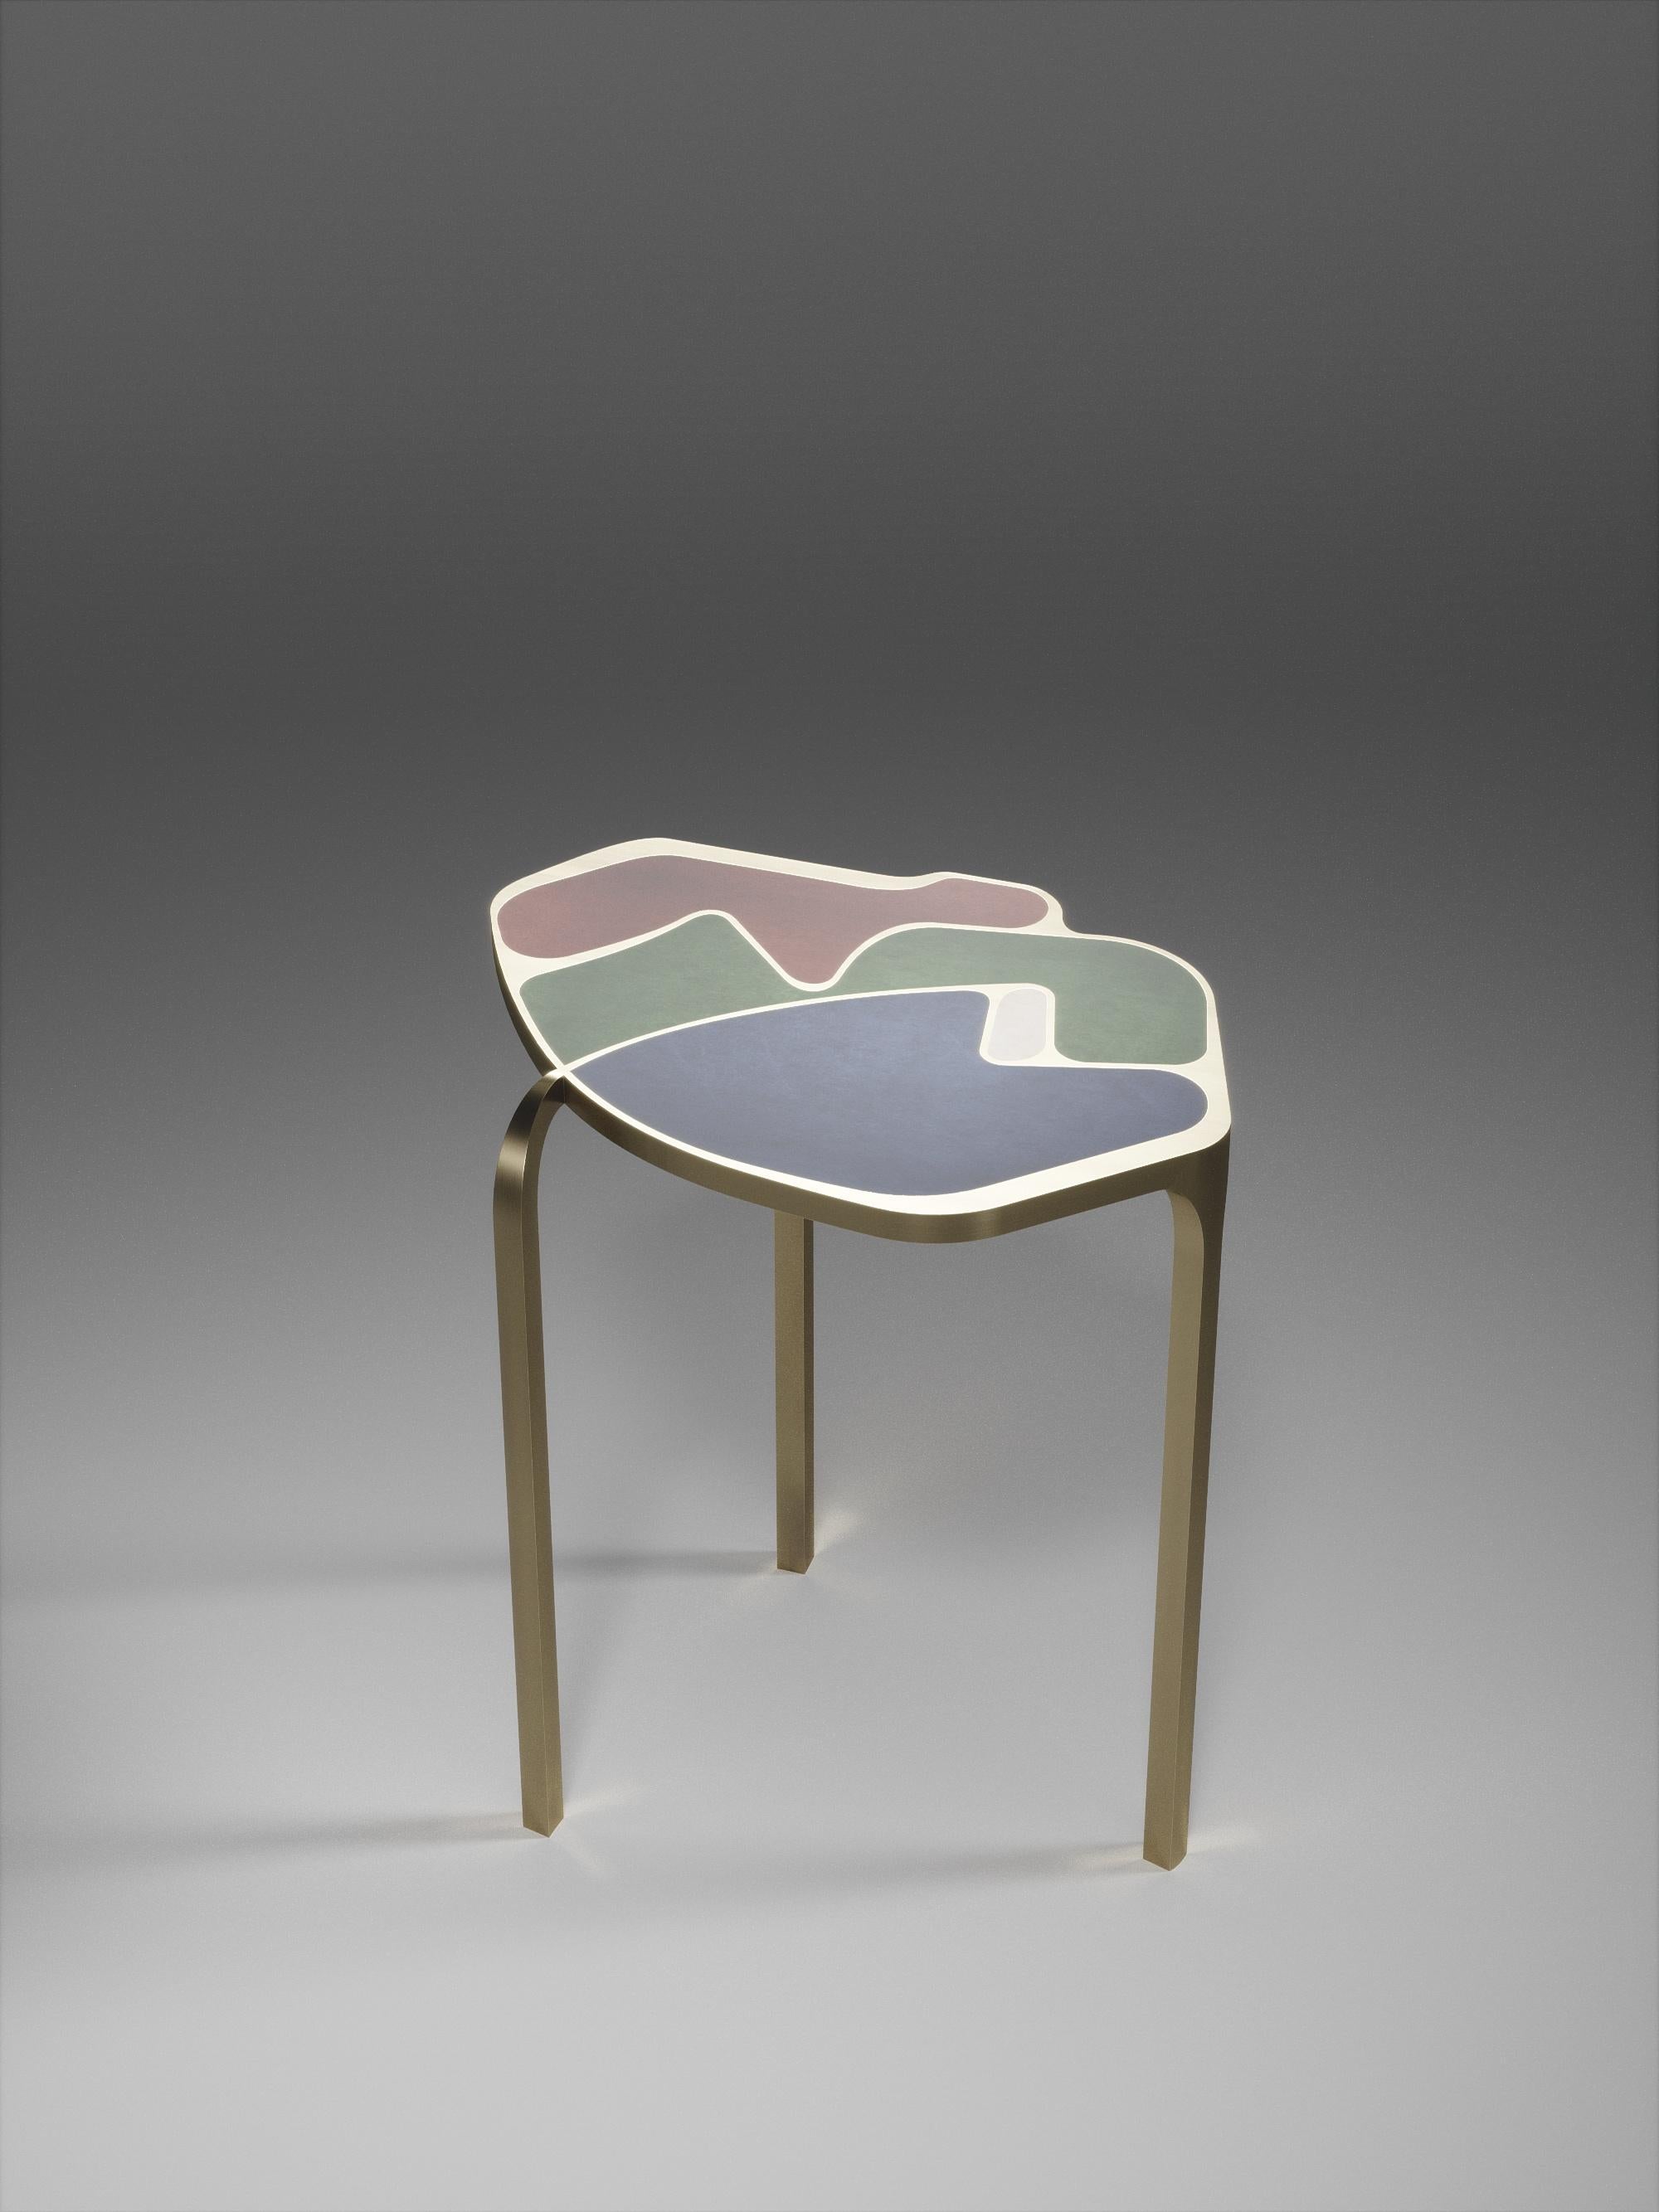 The Cocteau Side Table by R&Y Augousti is a truly one of a kind piece. The sculptural and ethereal piece has abstract forms, shapes and figures within it that one could interpret in different ways. The bronze-patina brass inserts in the